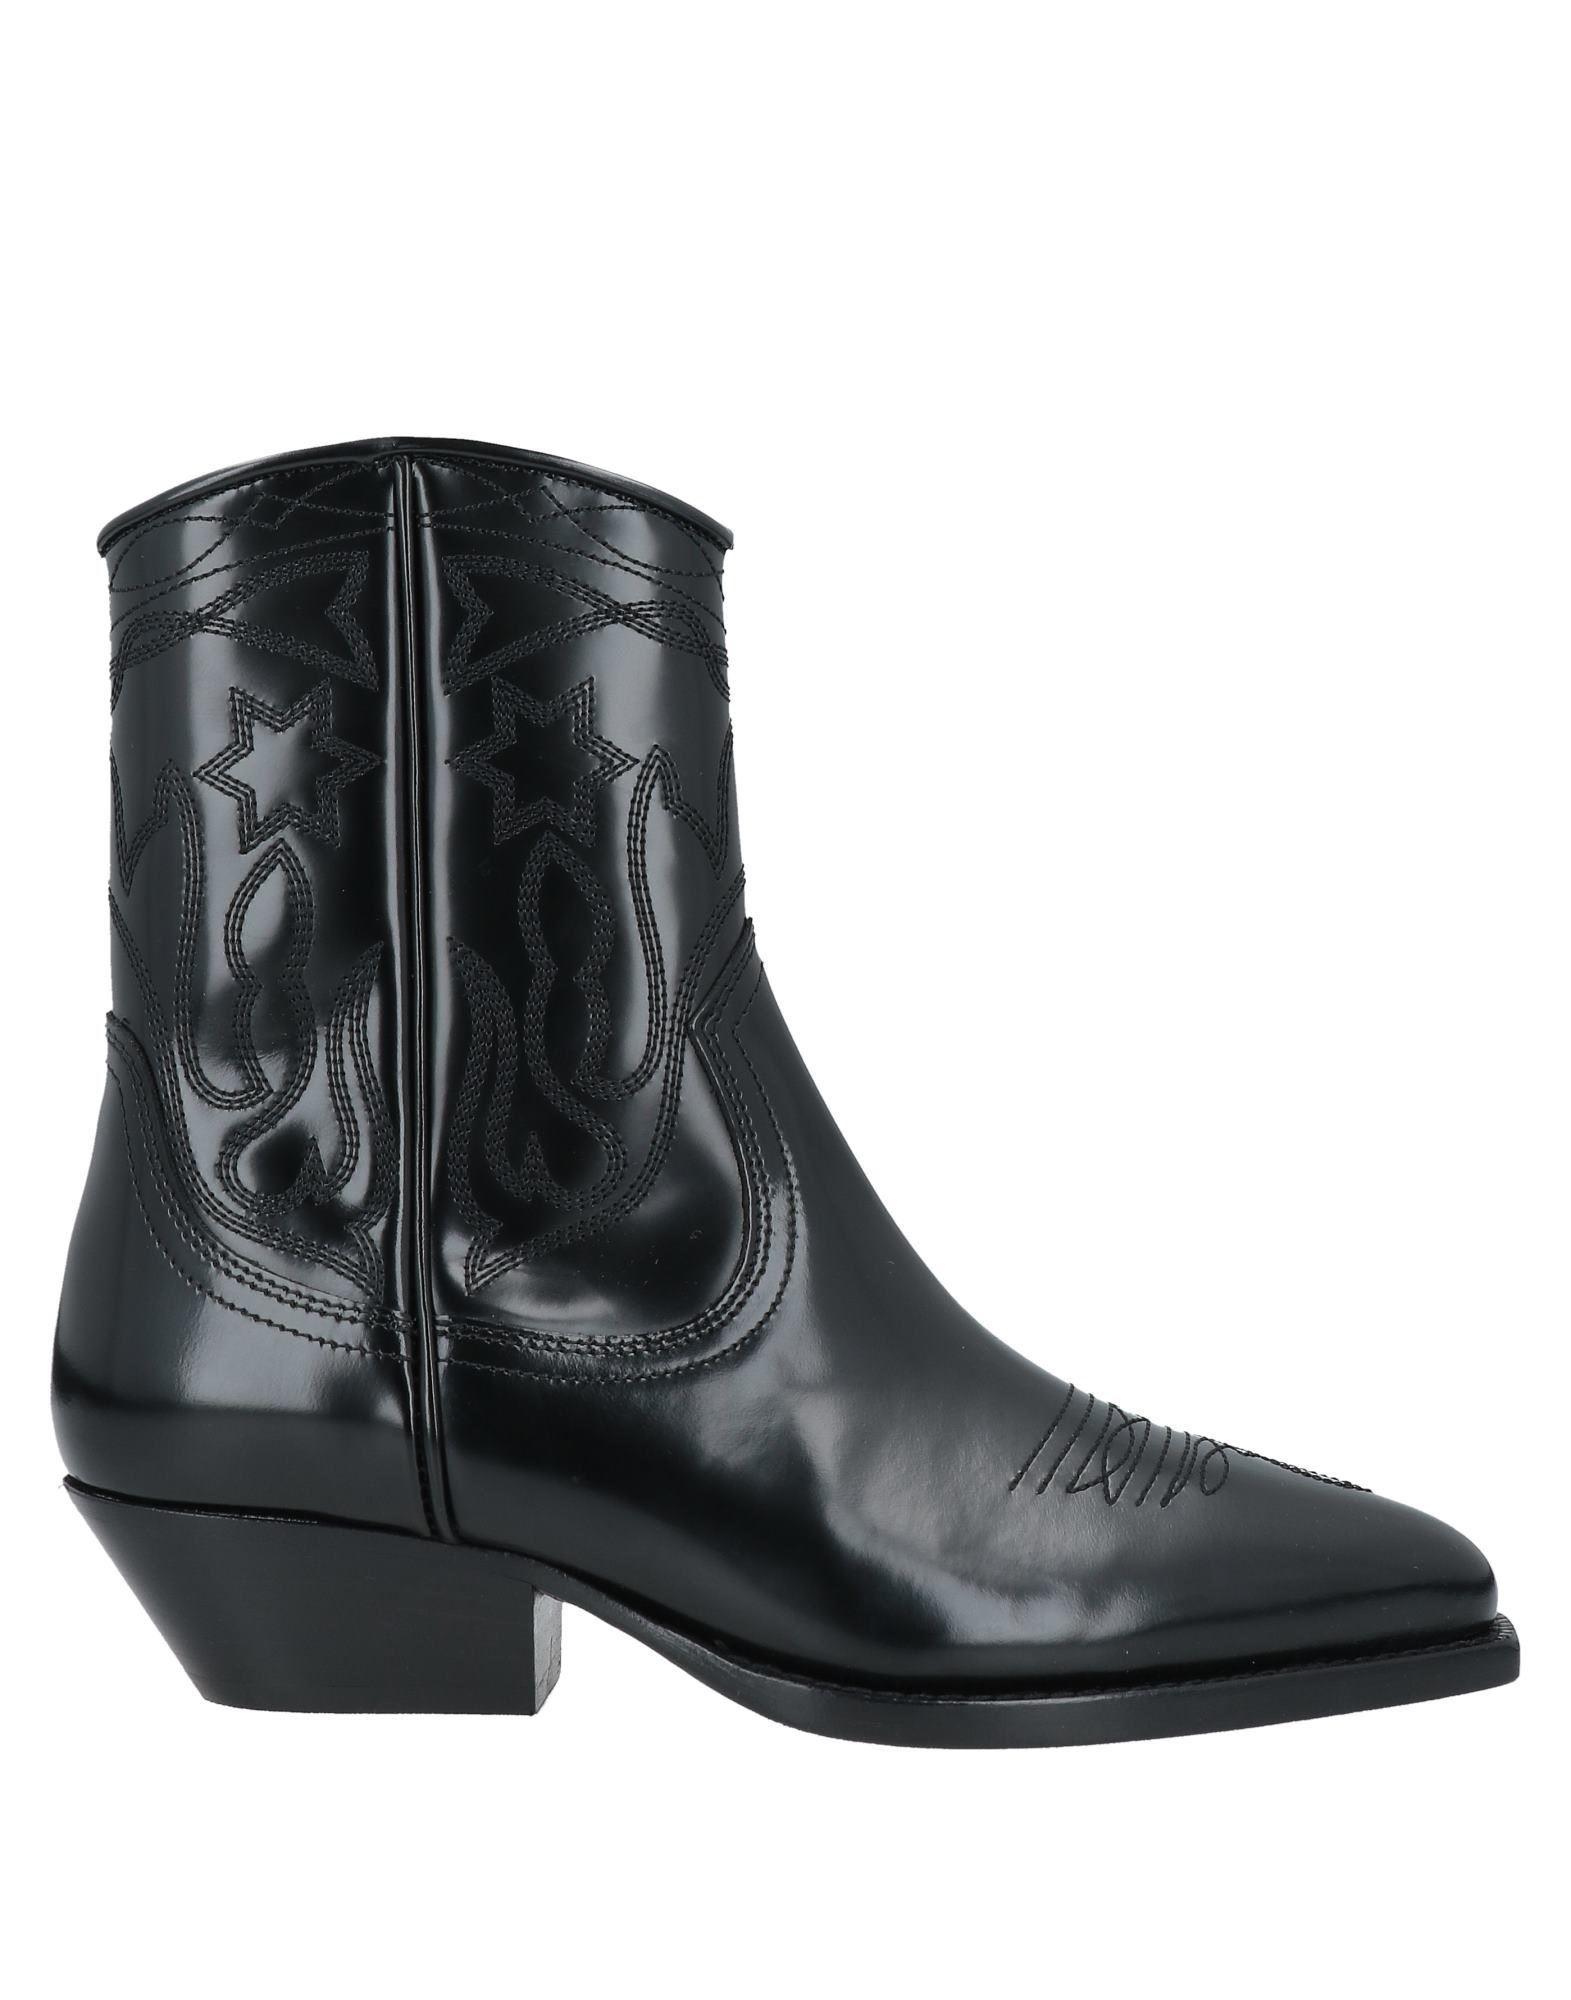 Sandro Leather Ankle Boots in Black - Lyst